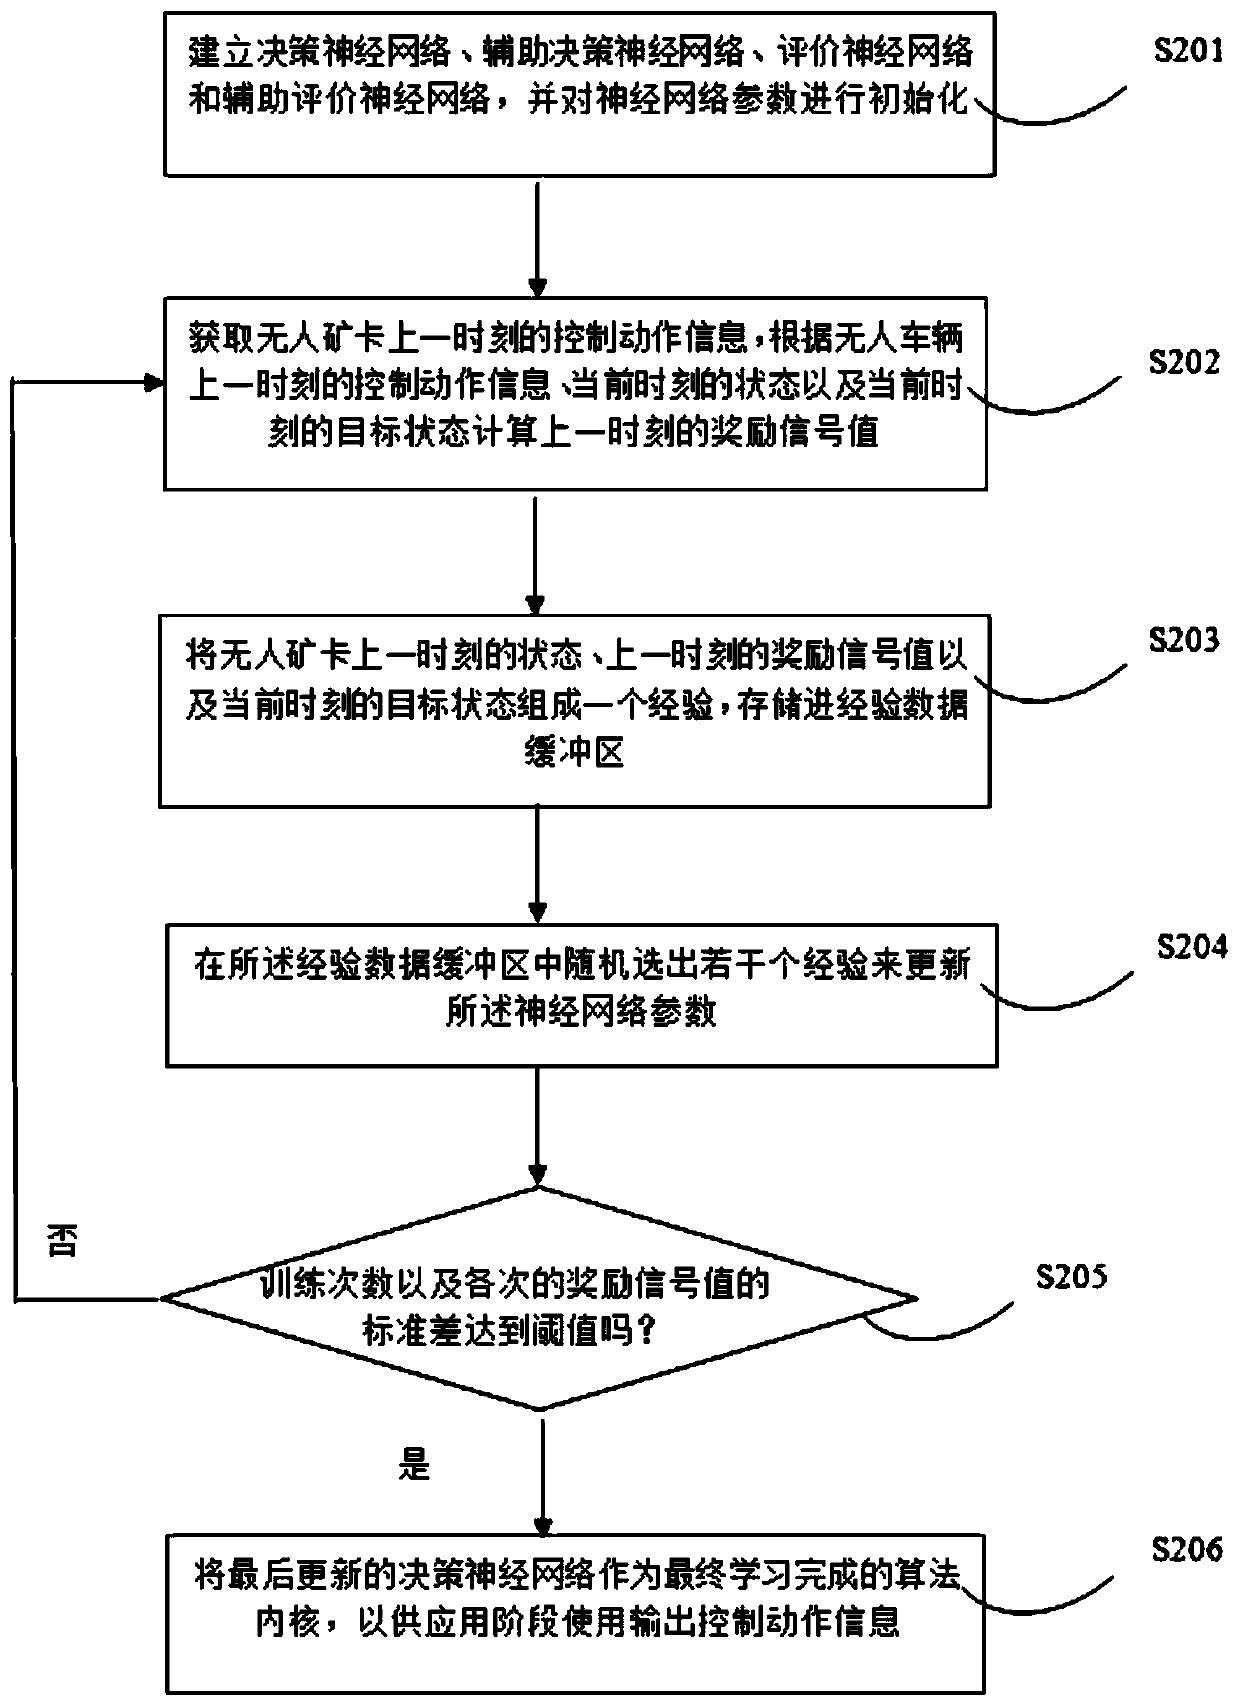 Unmanned mining truck tracking control system and method based on deep reinforcement learning